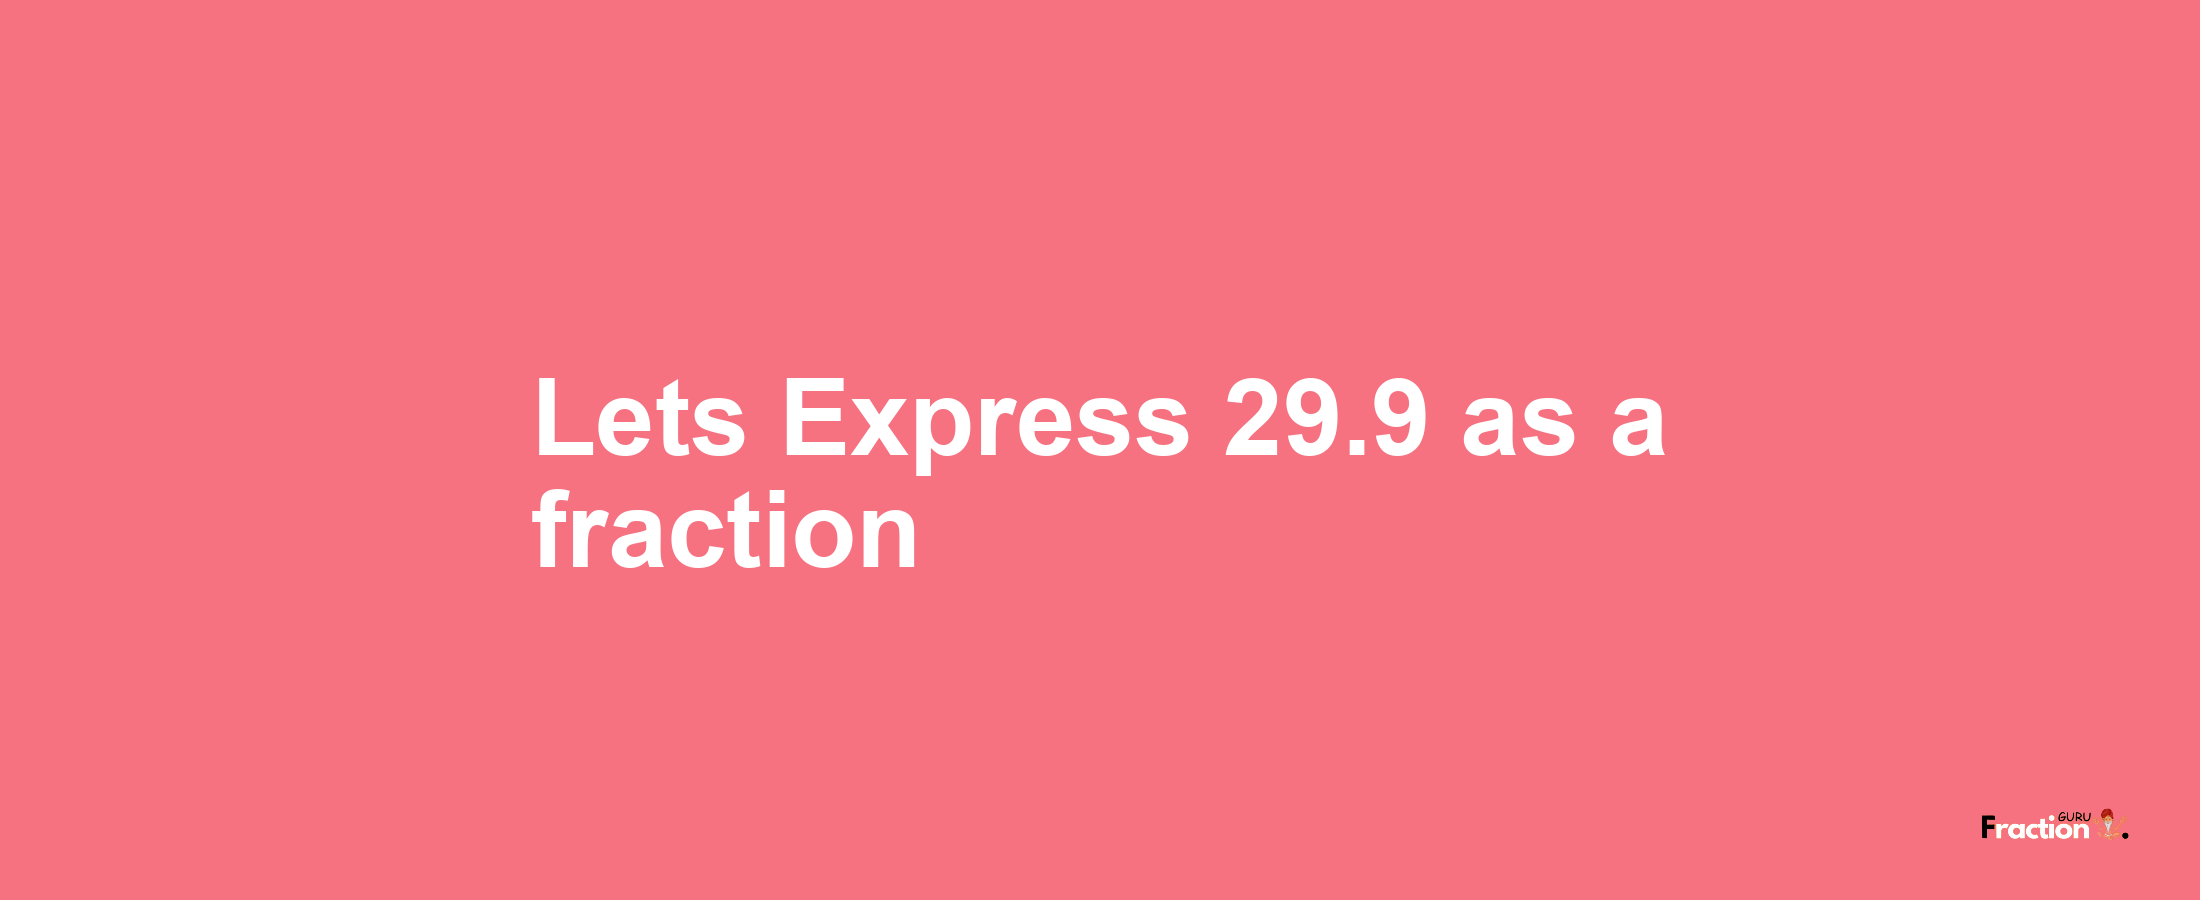 Lets Express 29.9 as afraction